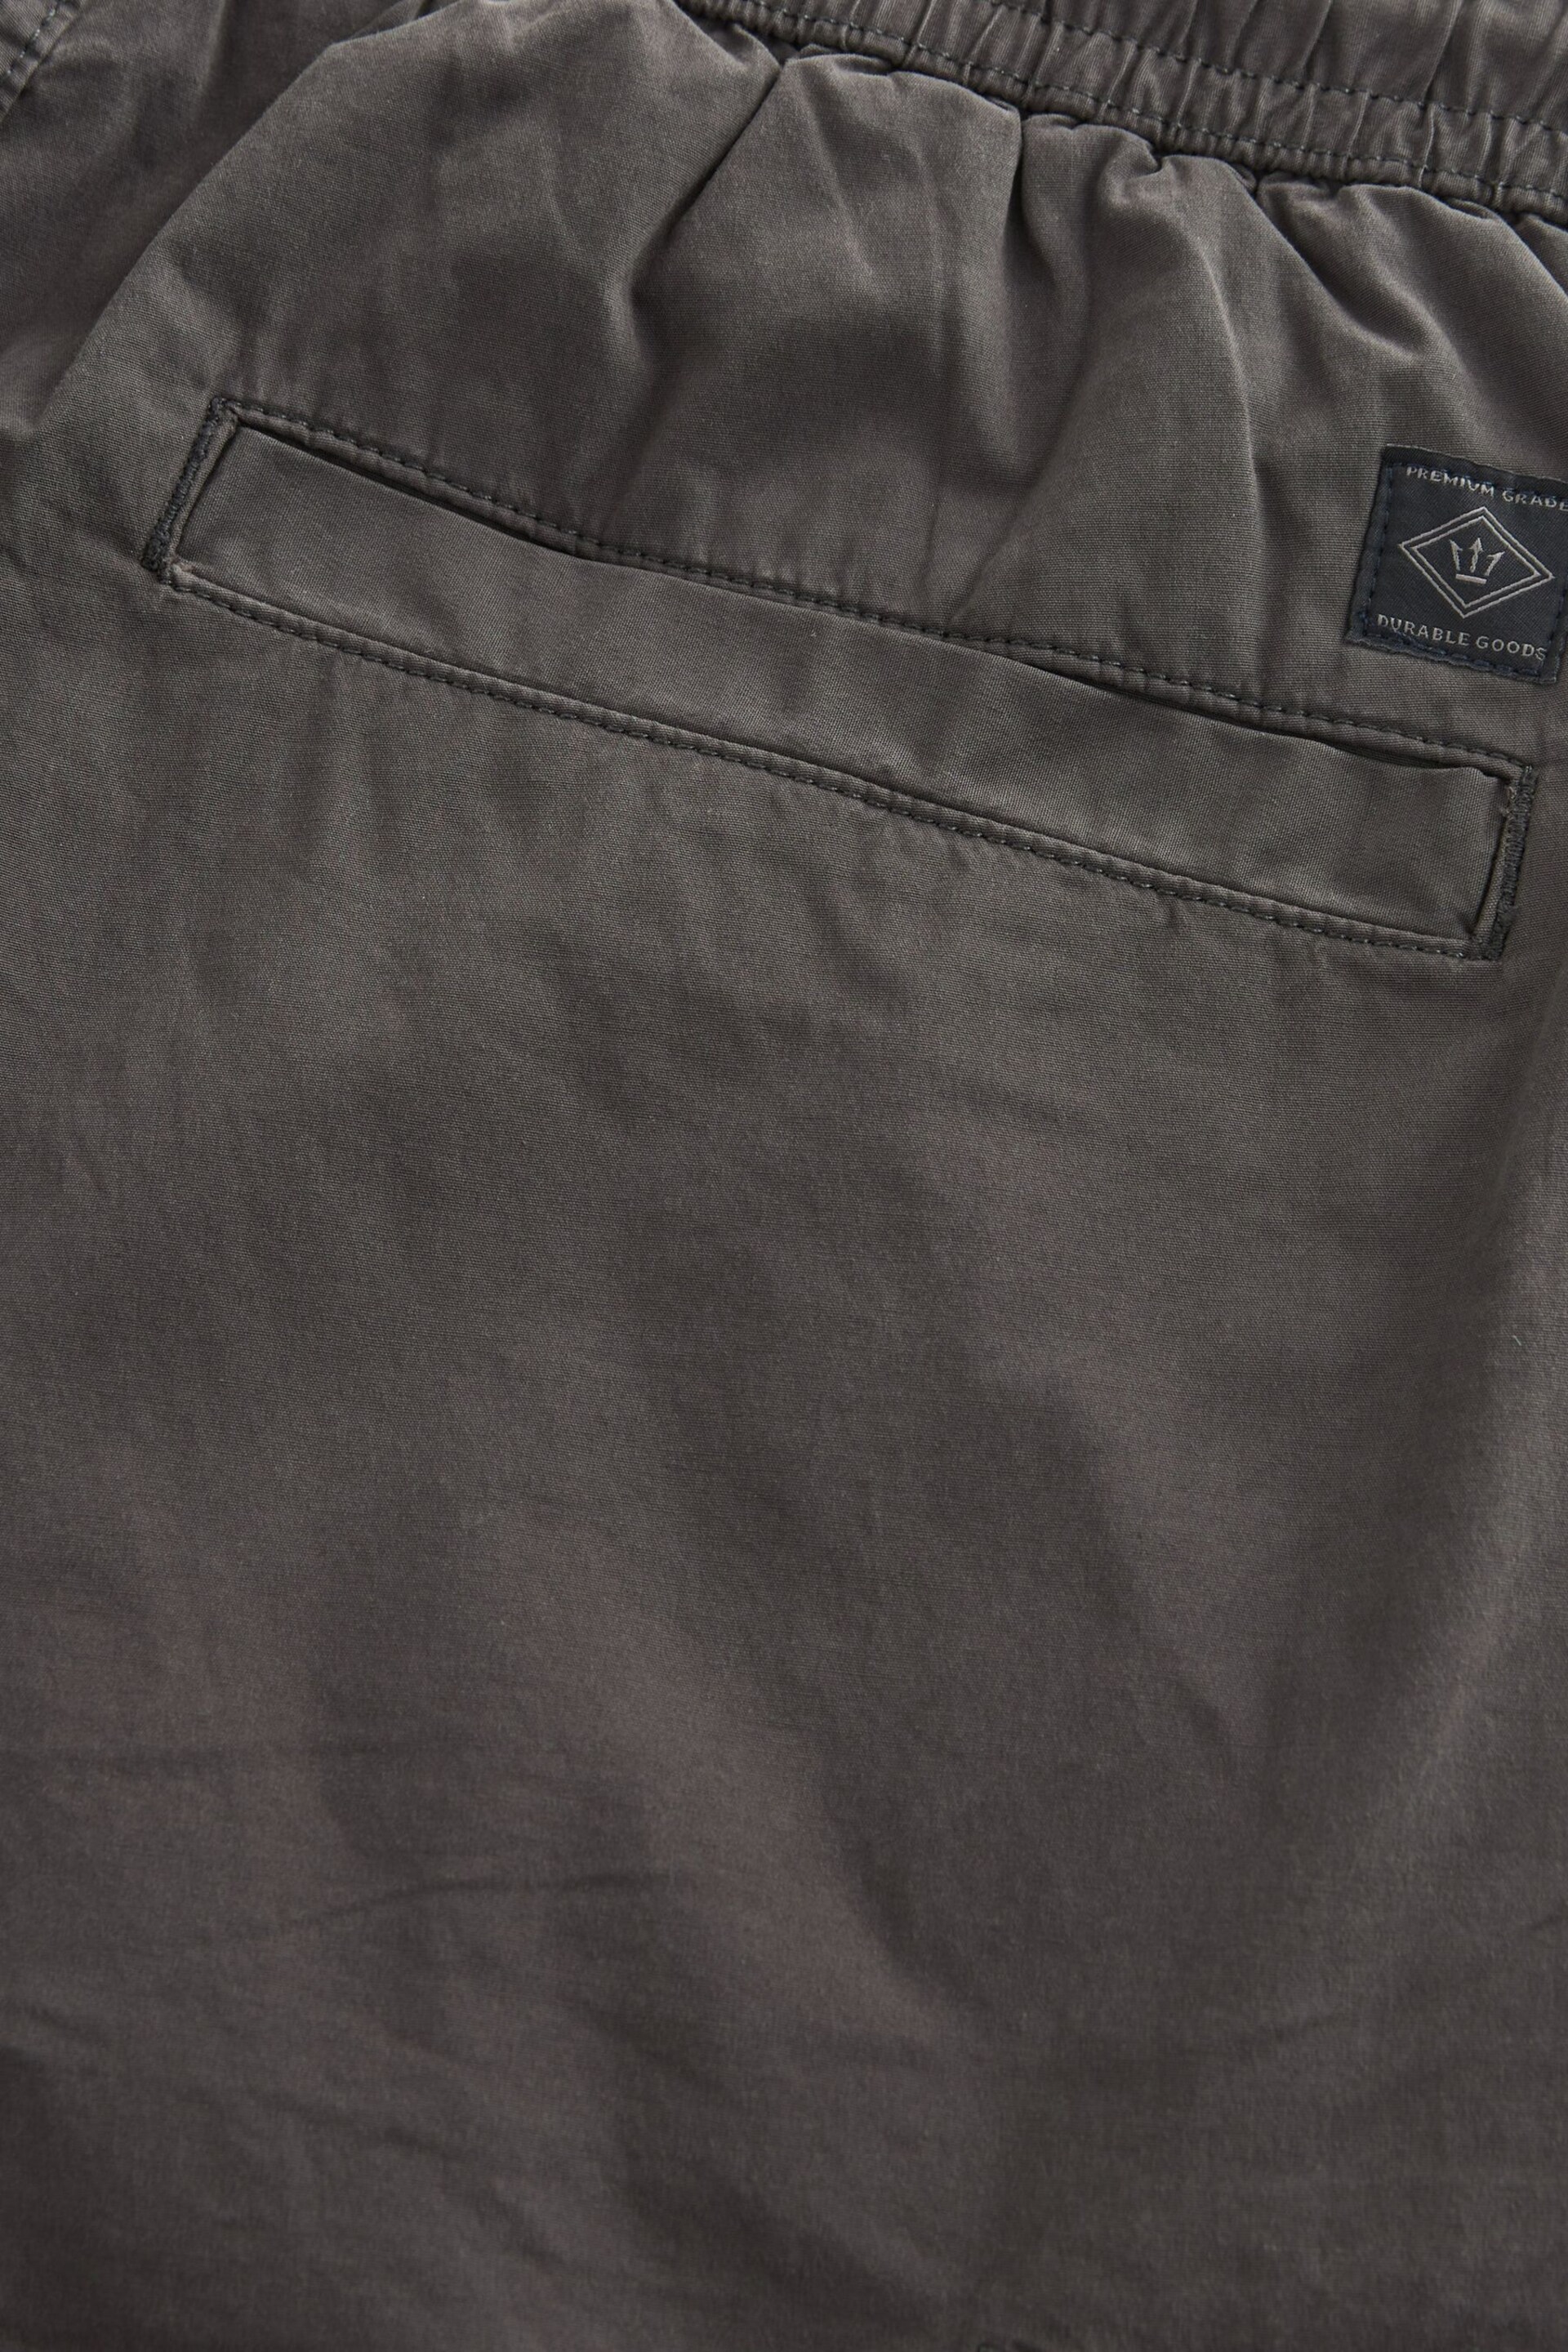 Charcoal Grey Slim Tapered Stretch Utility Cargo Trousers - Image 11 of 12